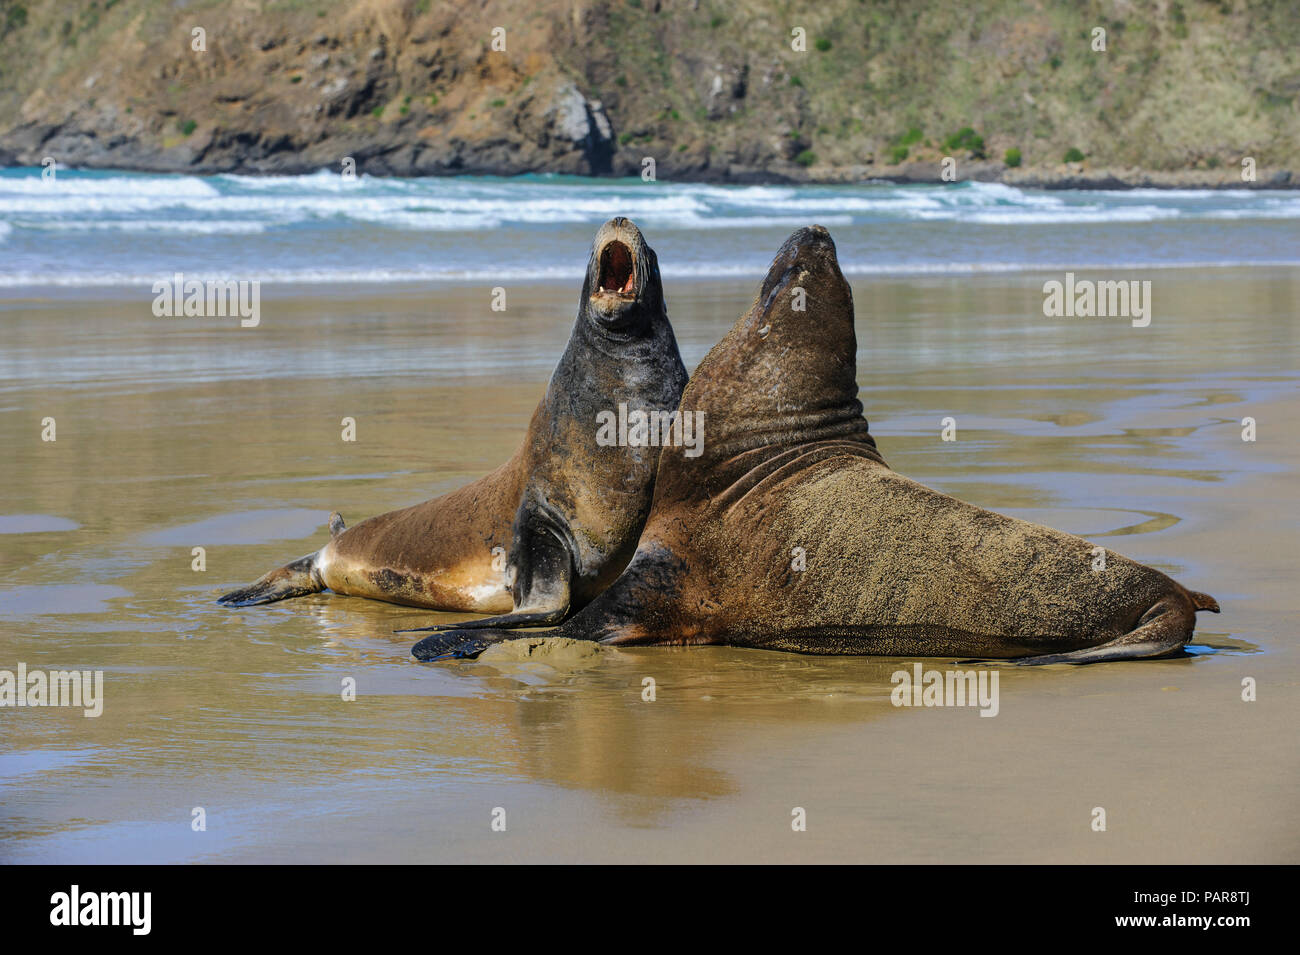 Two Hooker's Sea Lions (Phocarctos hookeri) mating at beach, Cannibal bay, the Catlins, South Island, New Zealand Stock Photo